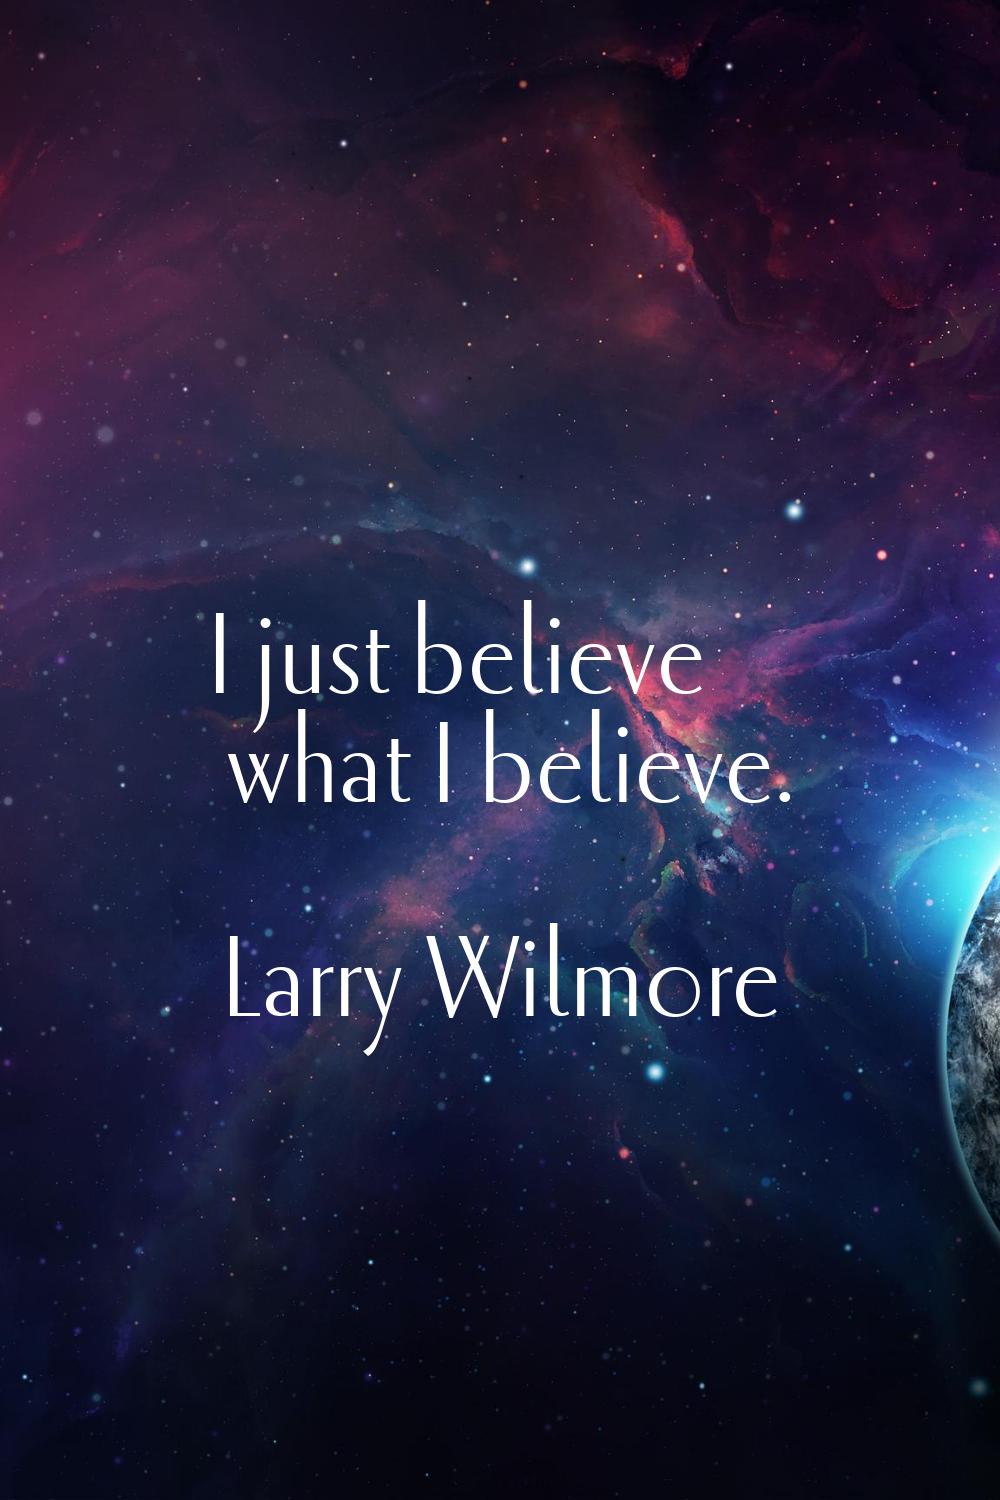 I just believe what I believe.